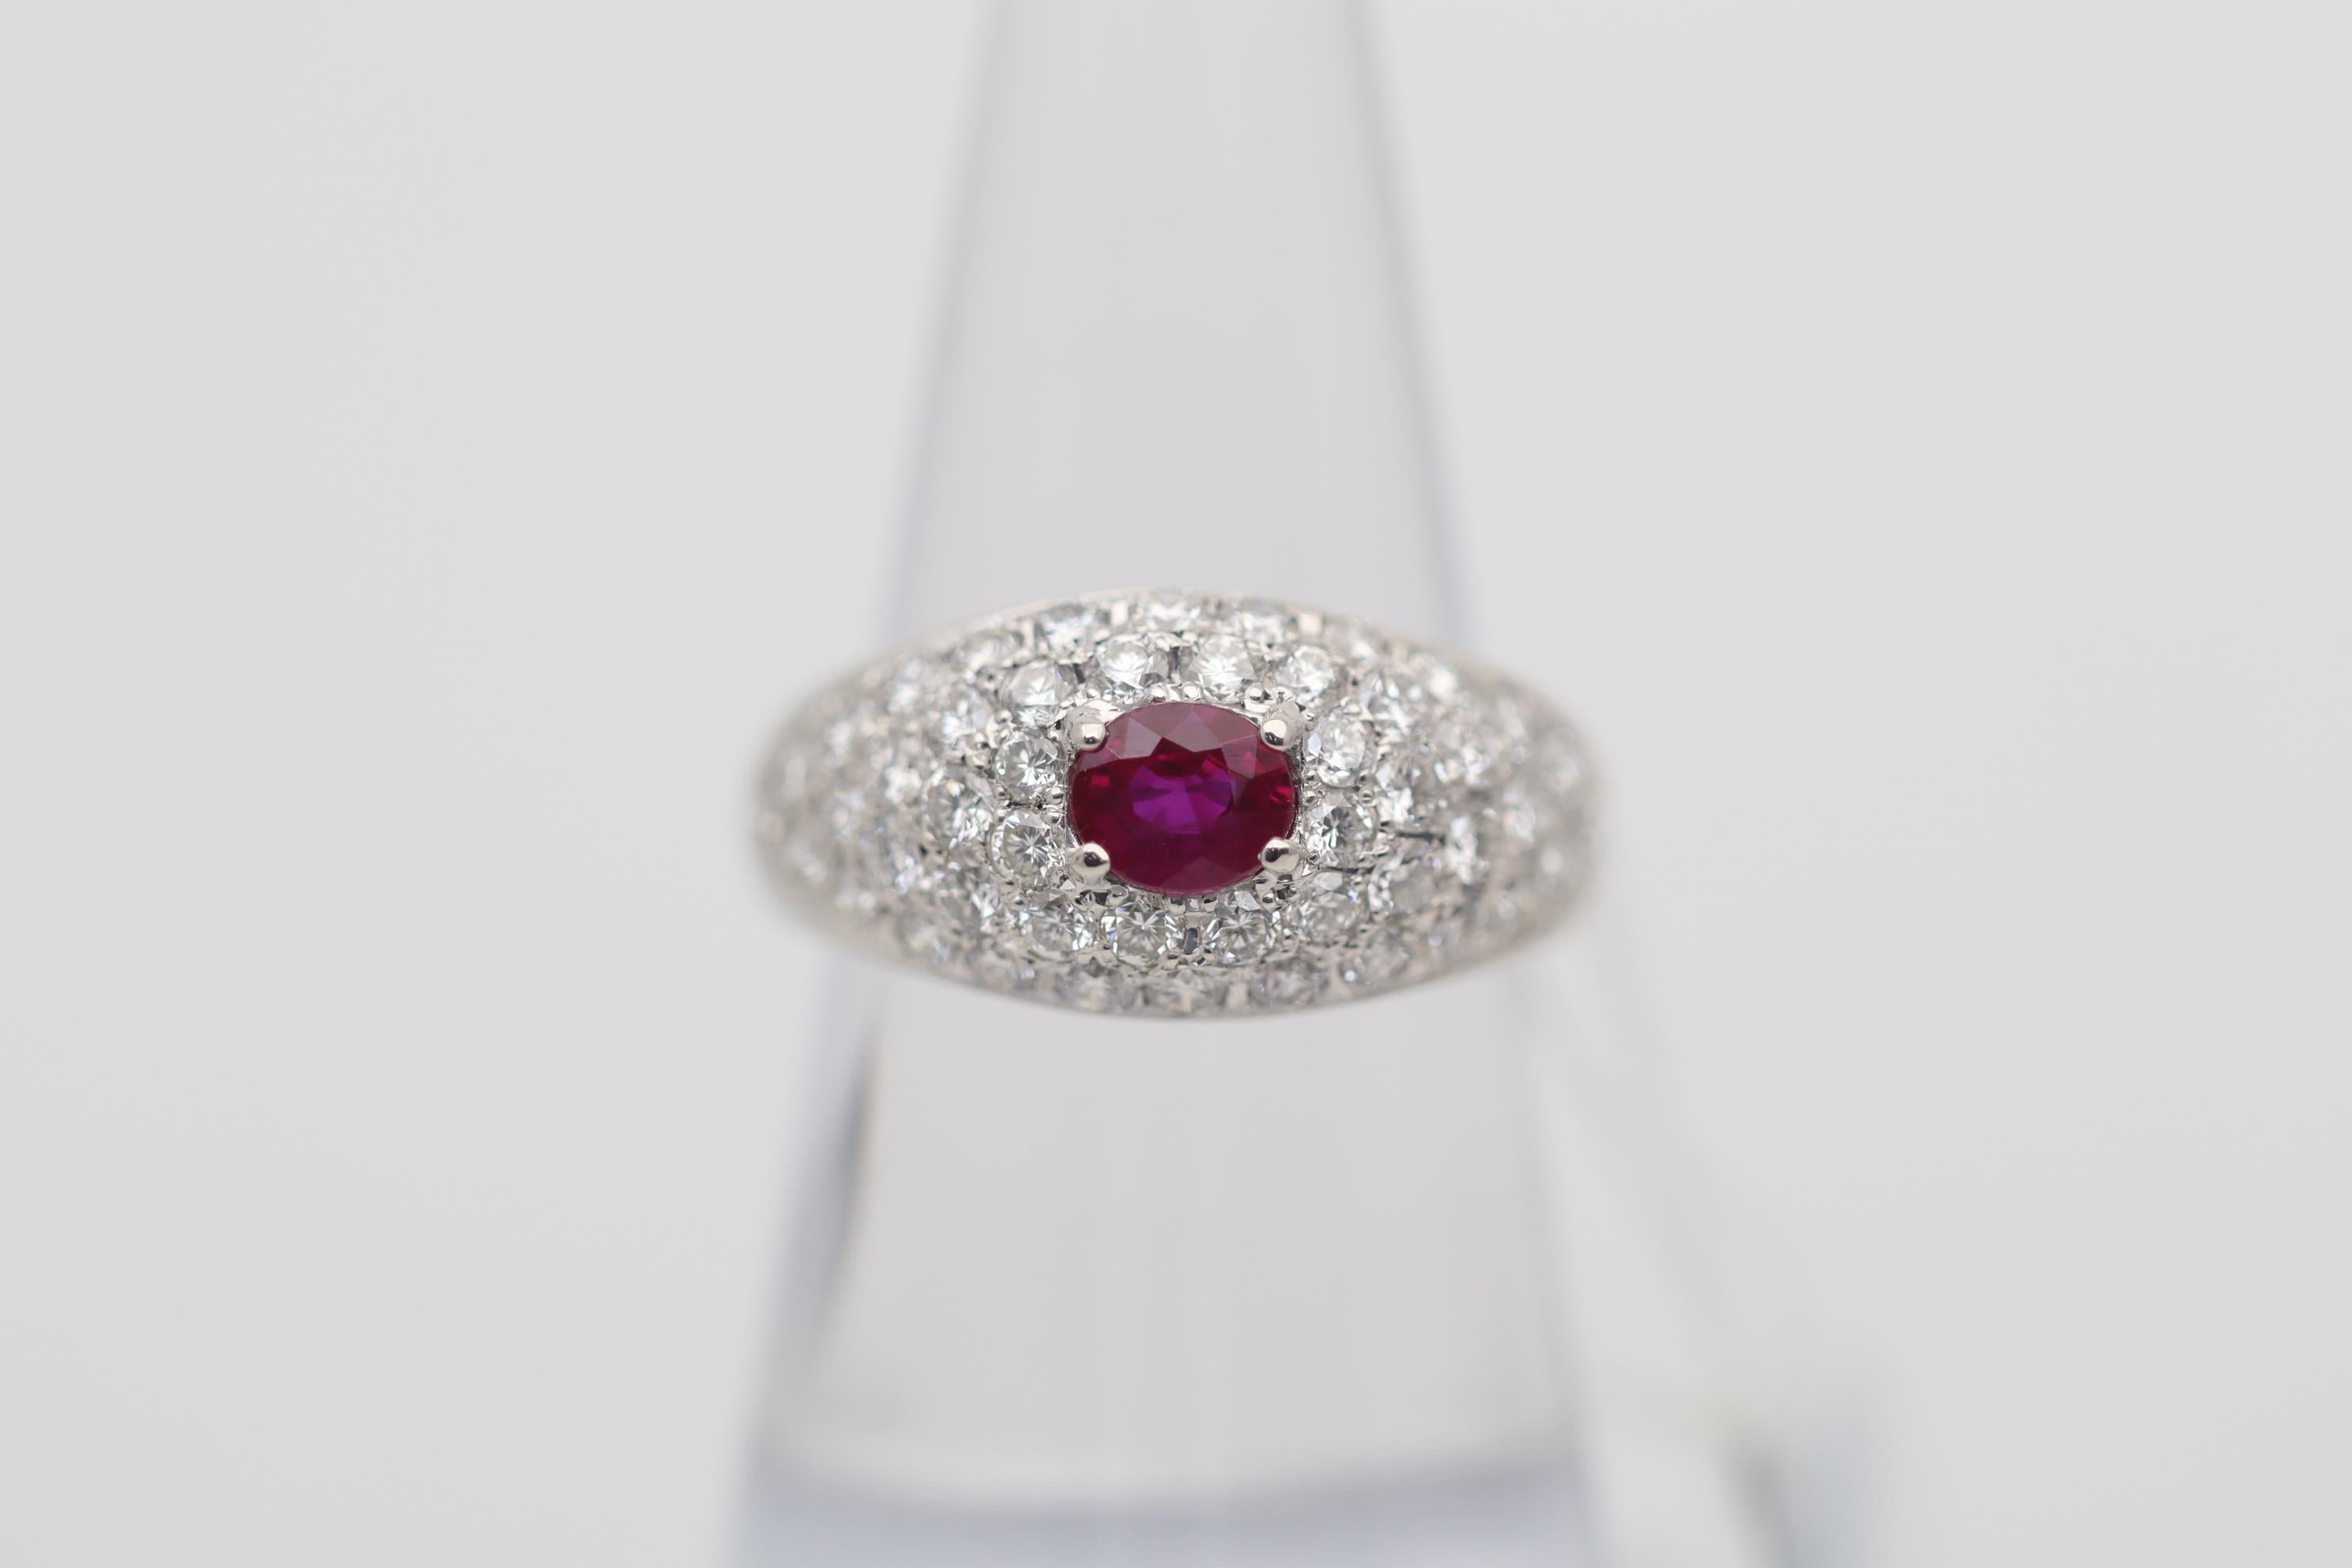 A classy ring featuring a gem of a ruby weighing 0.67 carats with a rich vivid red color. It is complemented by 1.45 carats of bright white pave-set diamonds surrounding the ruby and adding brilliant and sparkle to the piece. Hand-fabricated in